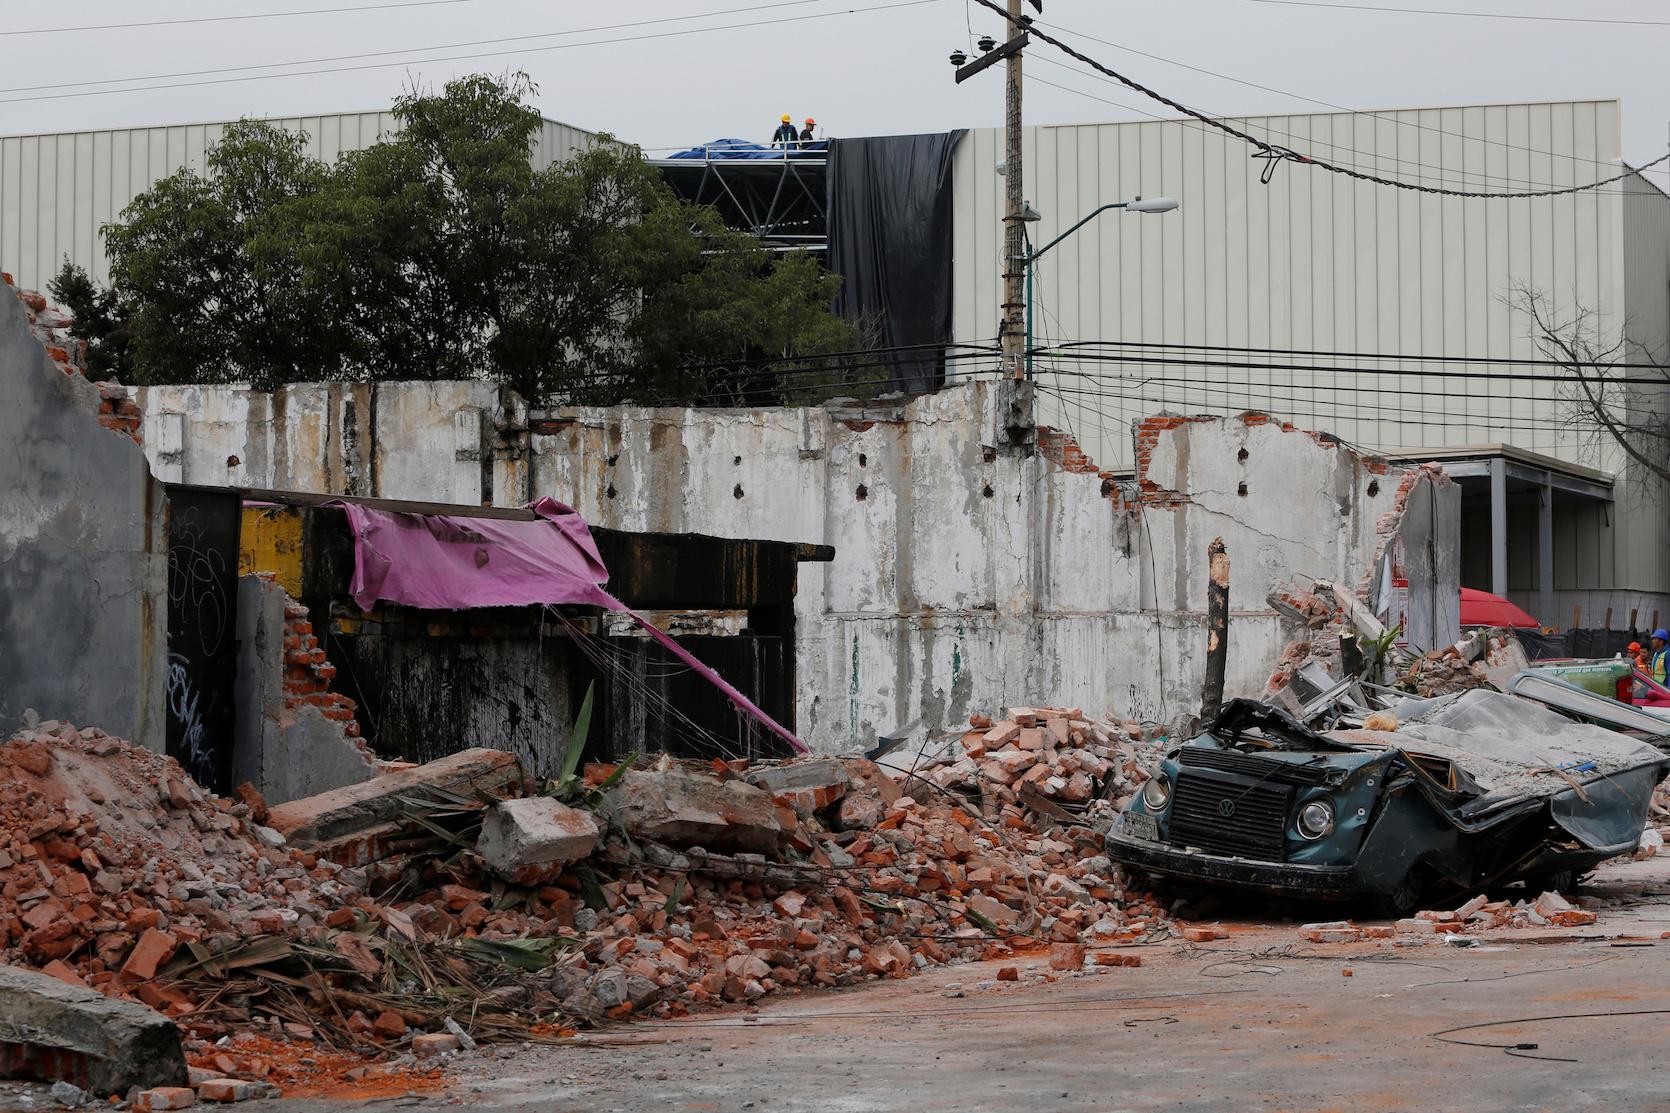 A damaged wall and a smashed vehicle are pictured after an earthquake in Mexico City on Sept. 8, 2017.